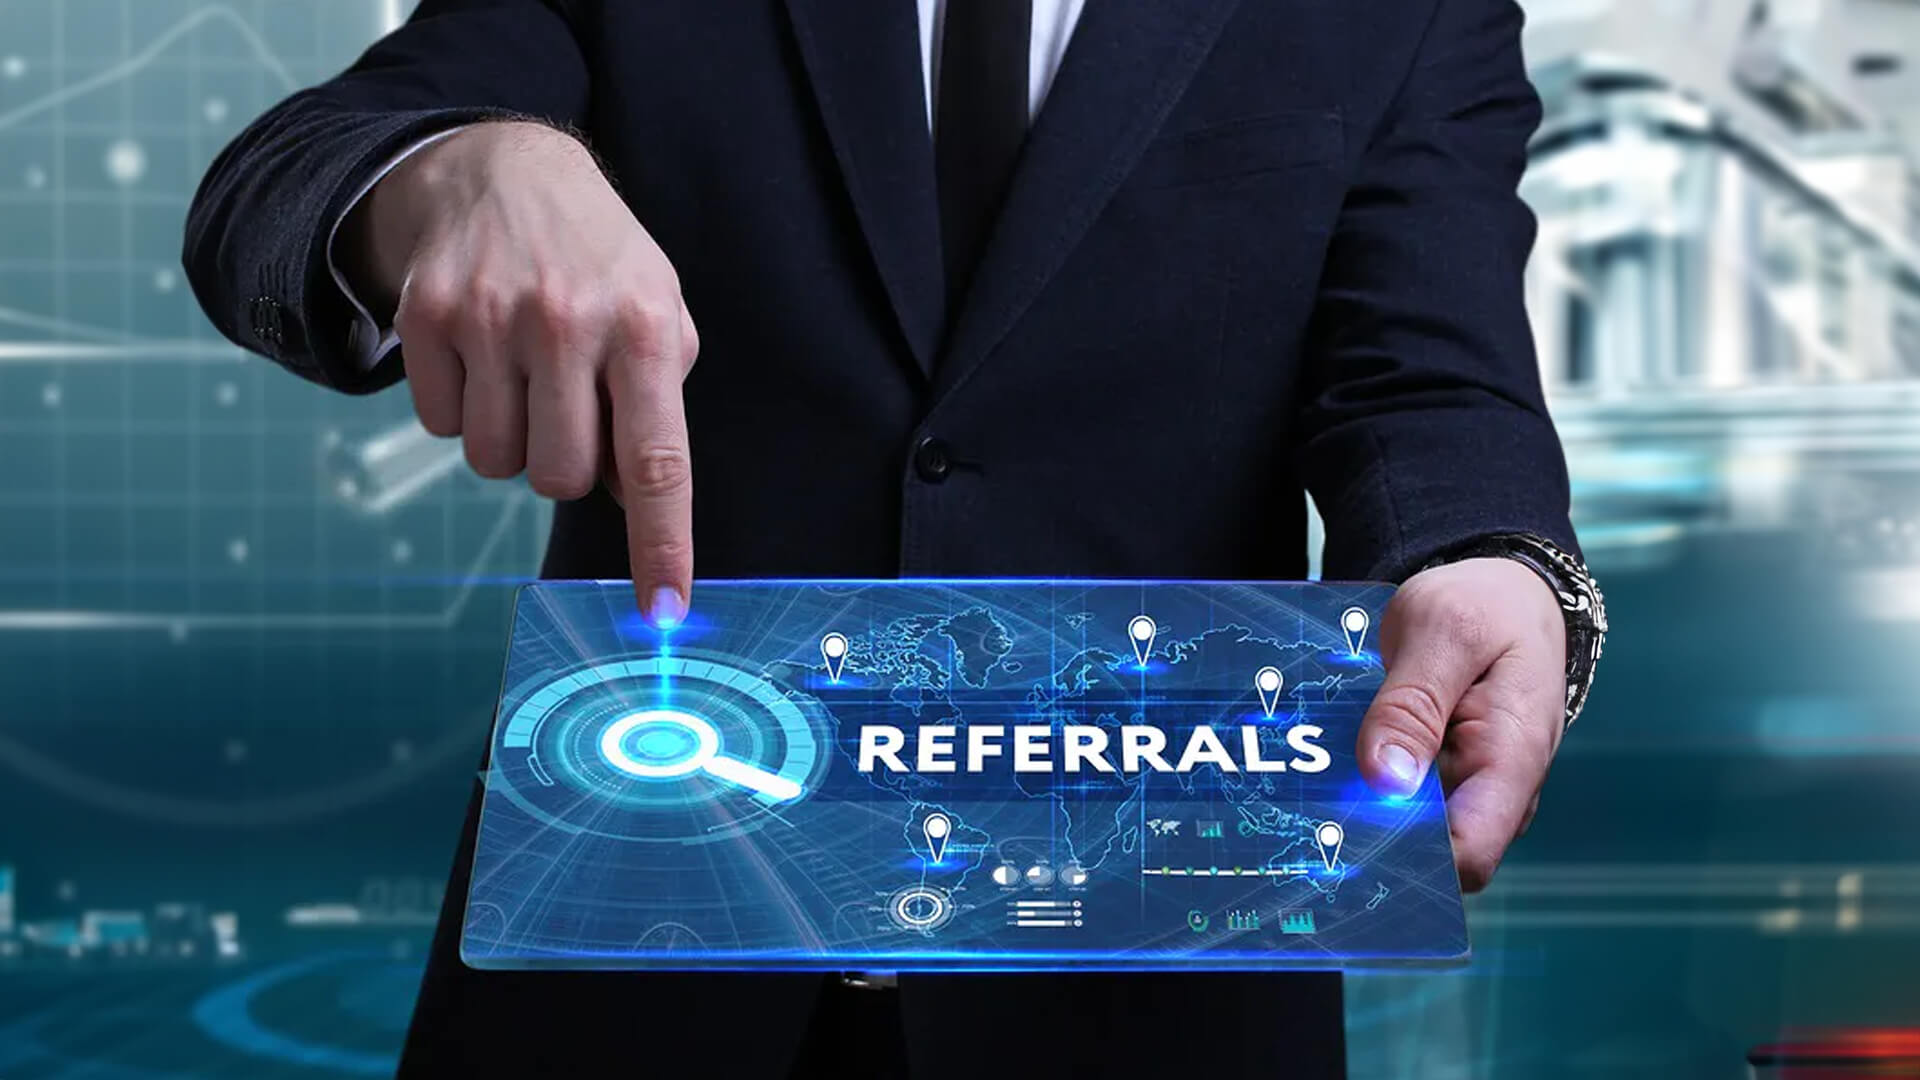 a businessman holding up a tablet with the word referrals on it